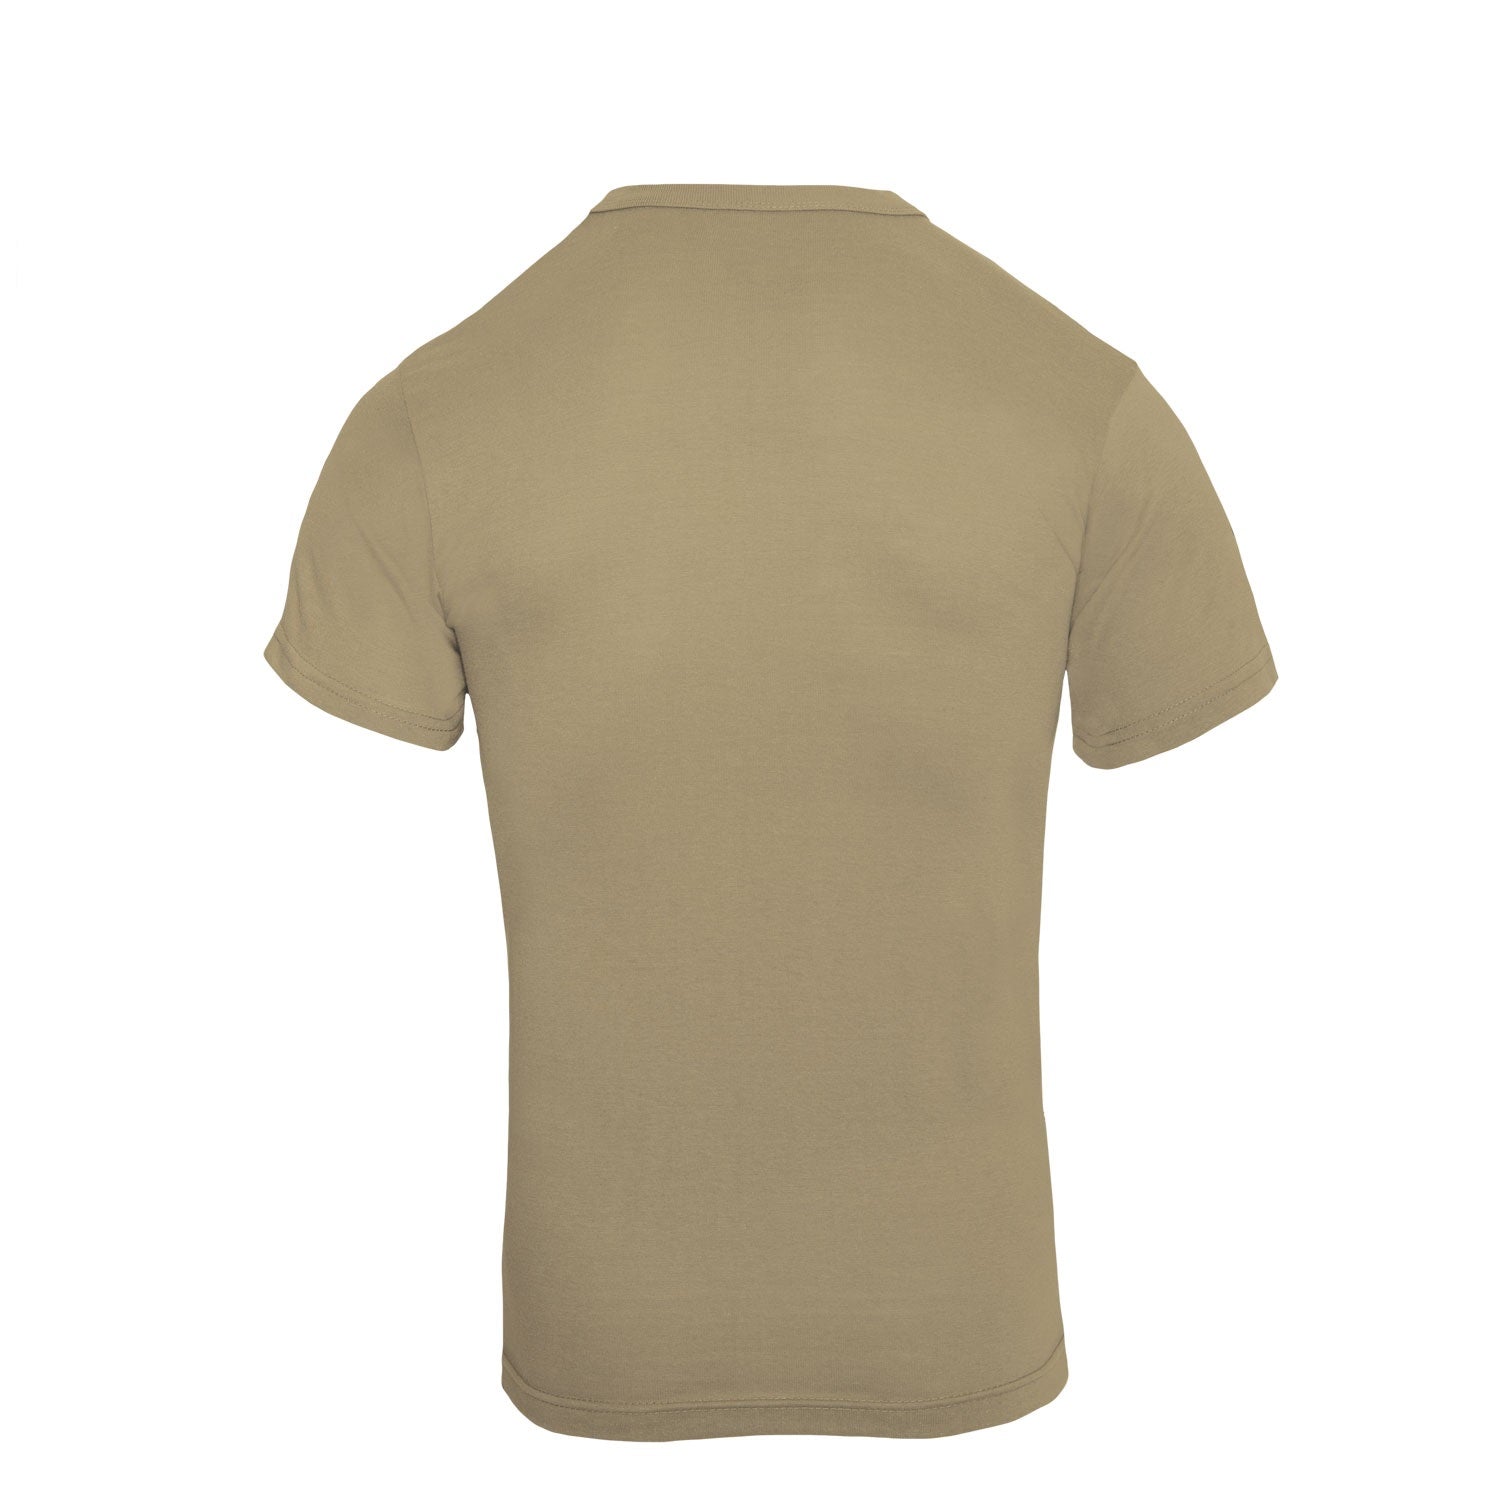 Rothco Solid Color Cotton / Polyester Blend Military T-Shirt Khaki